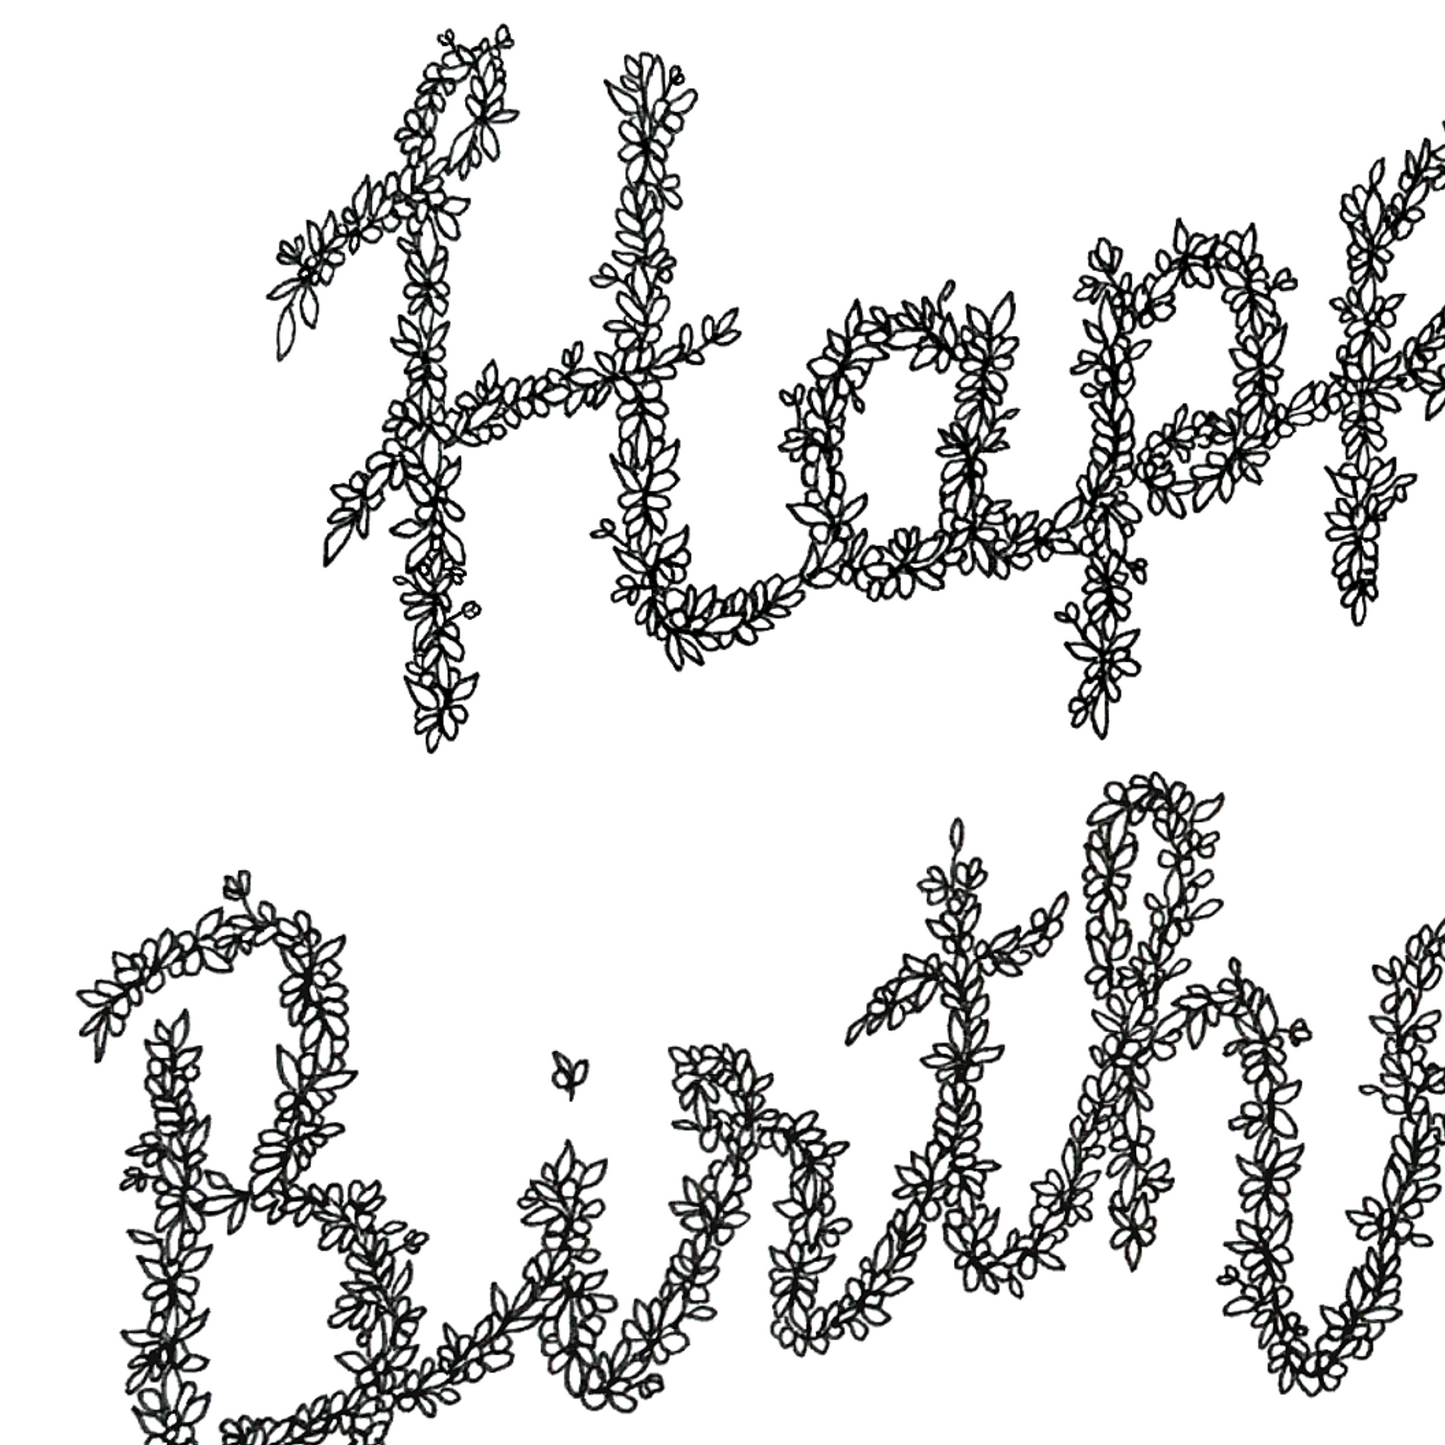 Image shows up close detailed Illustration card of the phrase Happy Birthday. The image is made entirely of flowers and is black and white. 